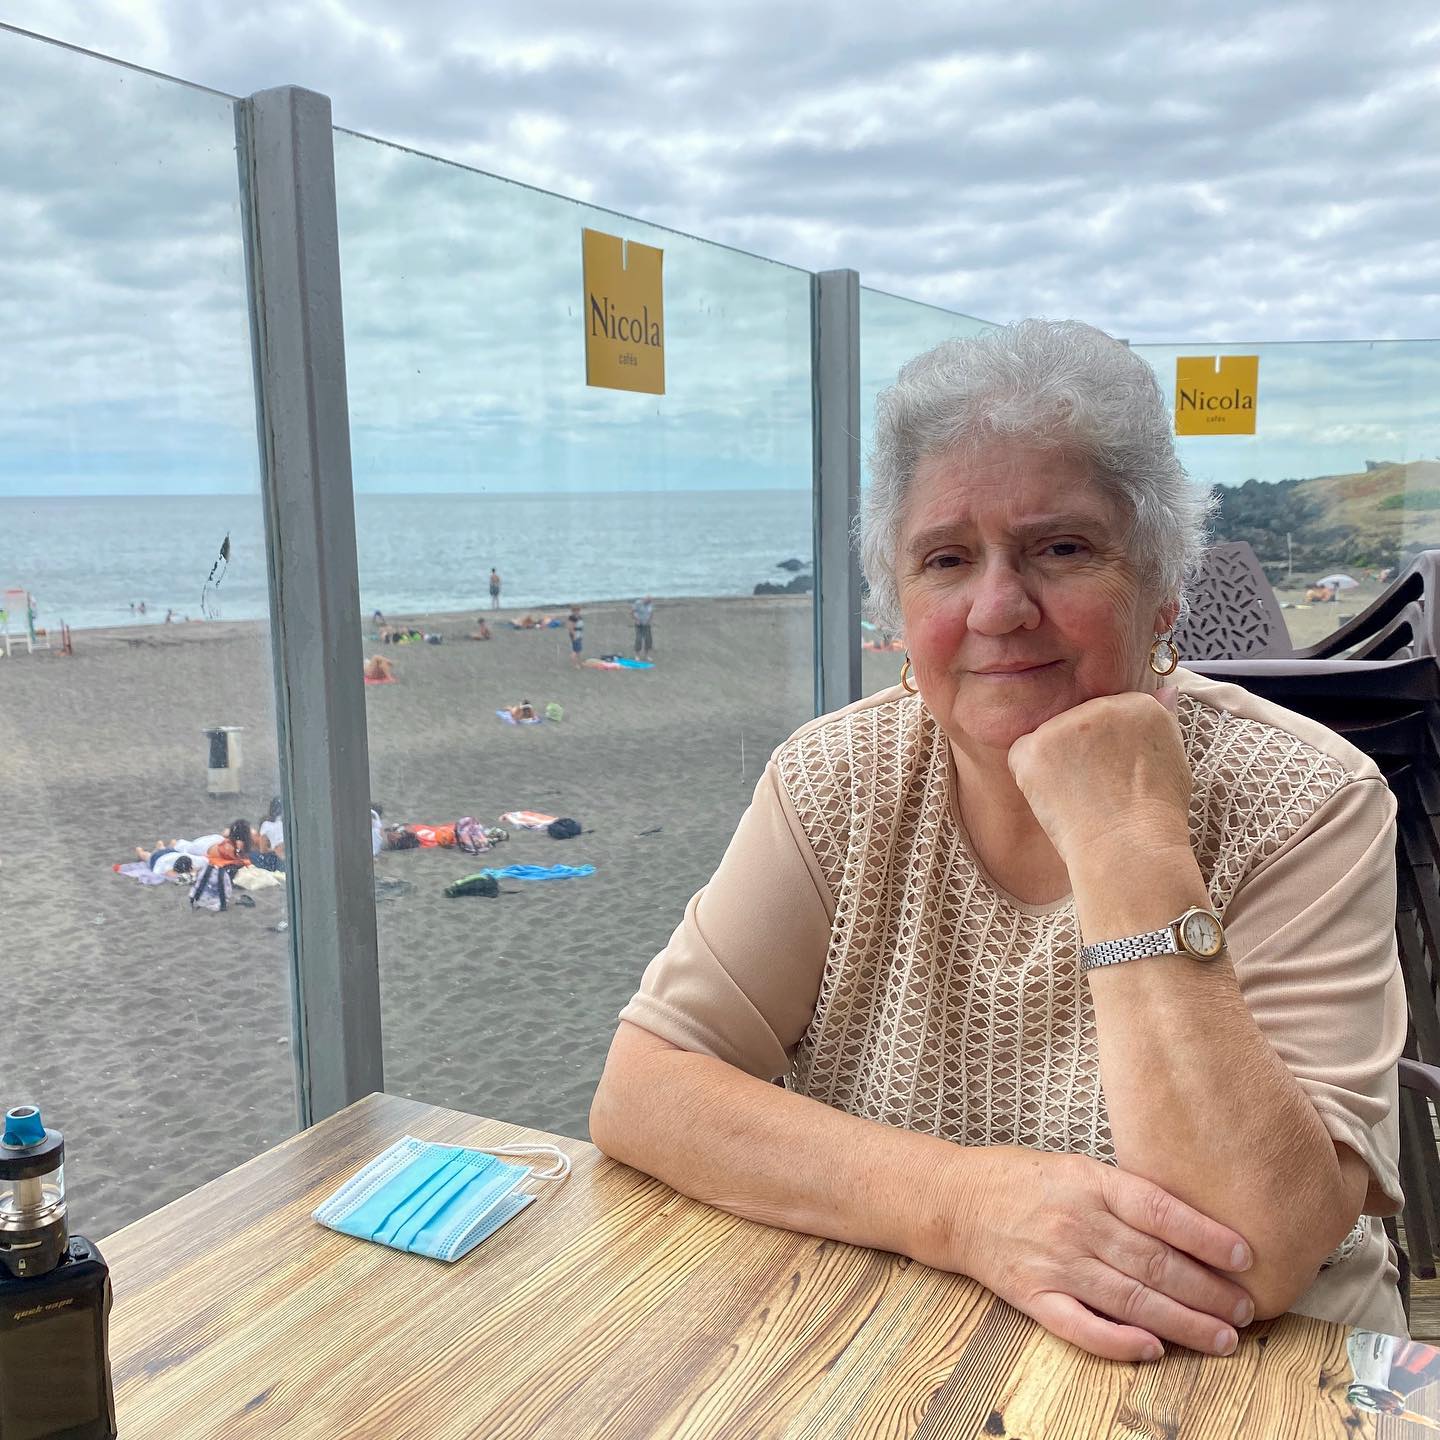 Having a drink with mom at the beach, spent some quality time today with her :)